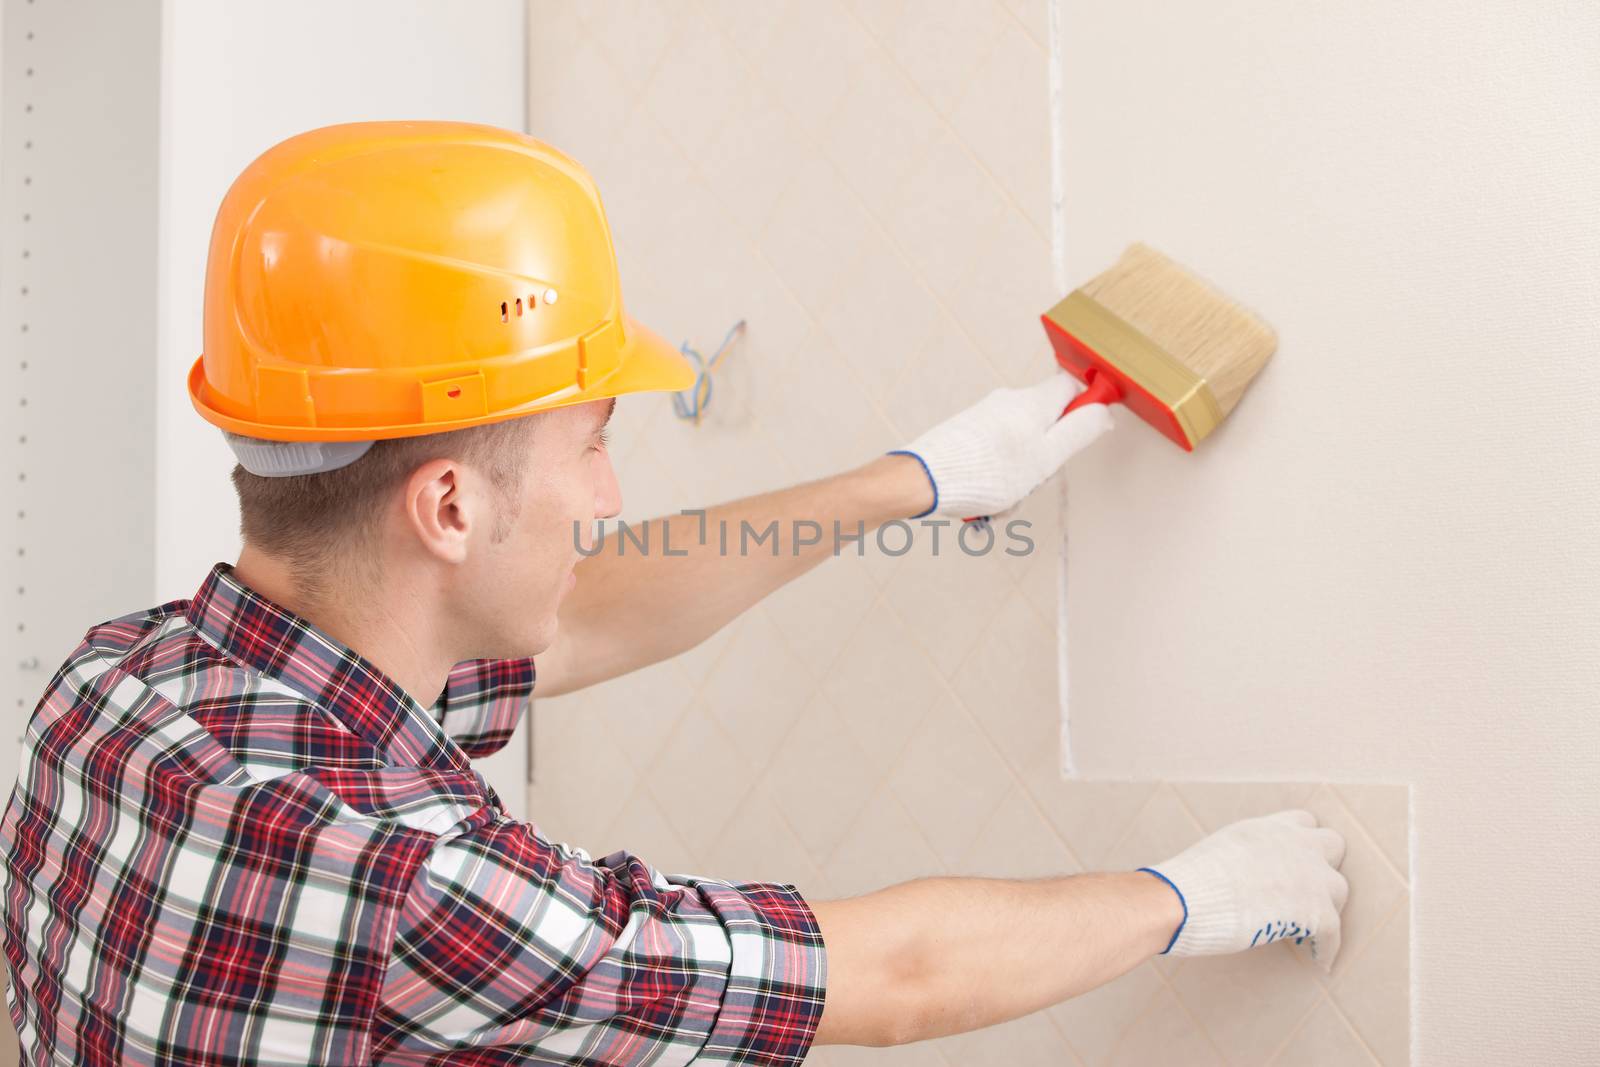 worker with paint brush prepares the wall for wallpapering